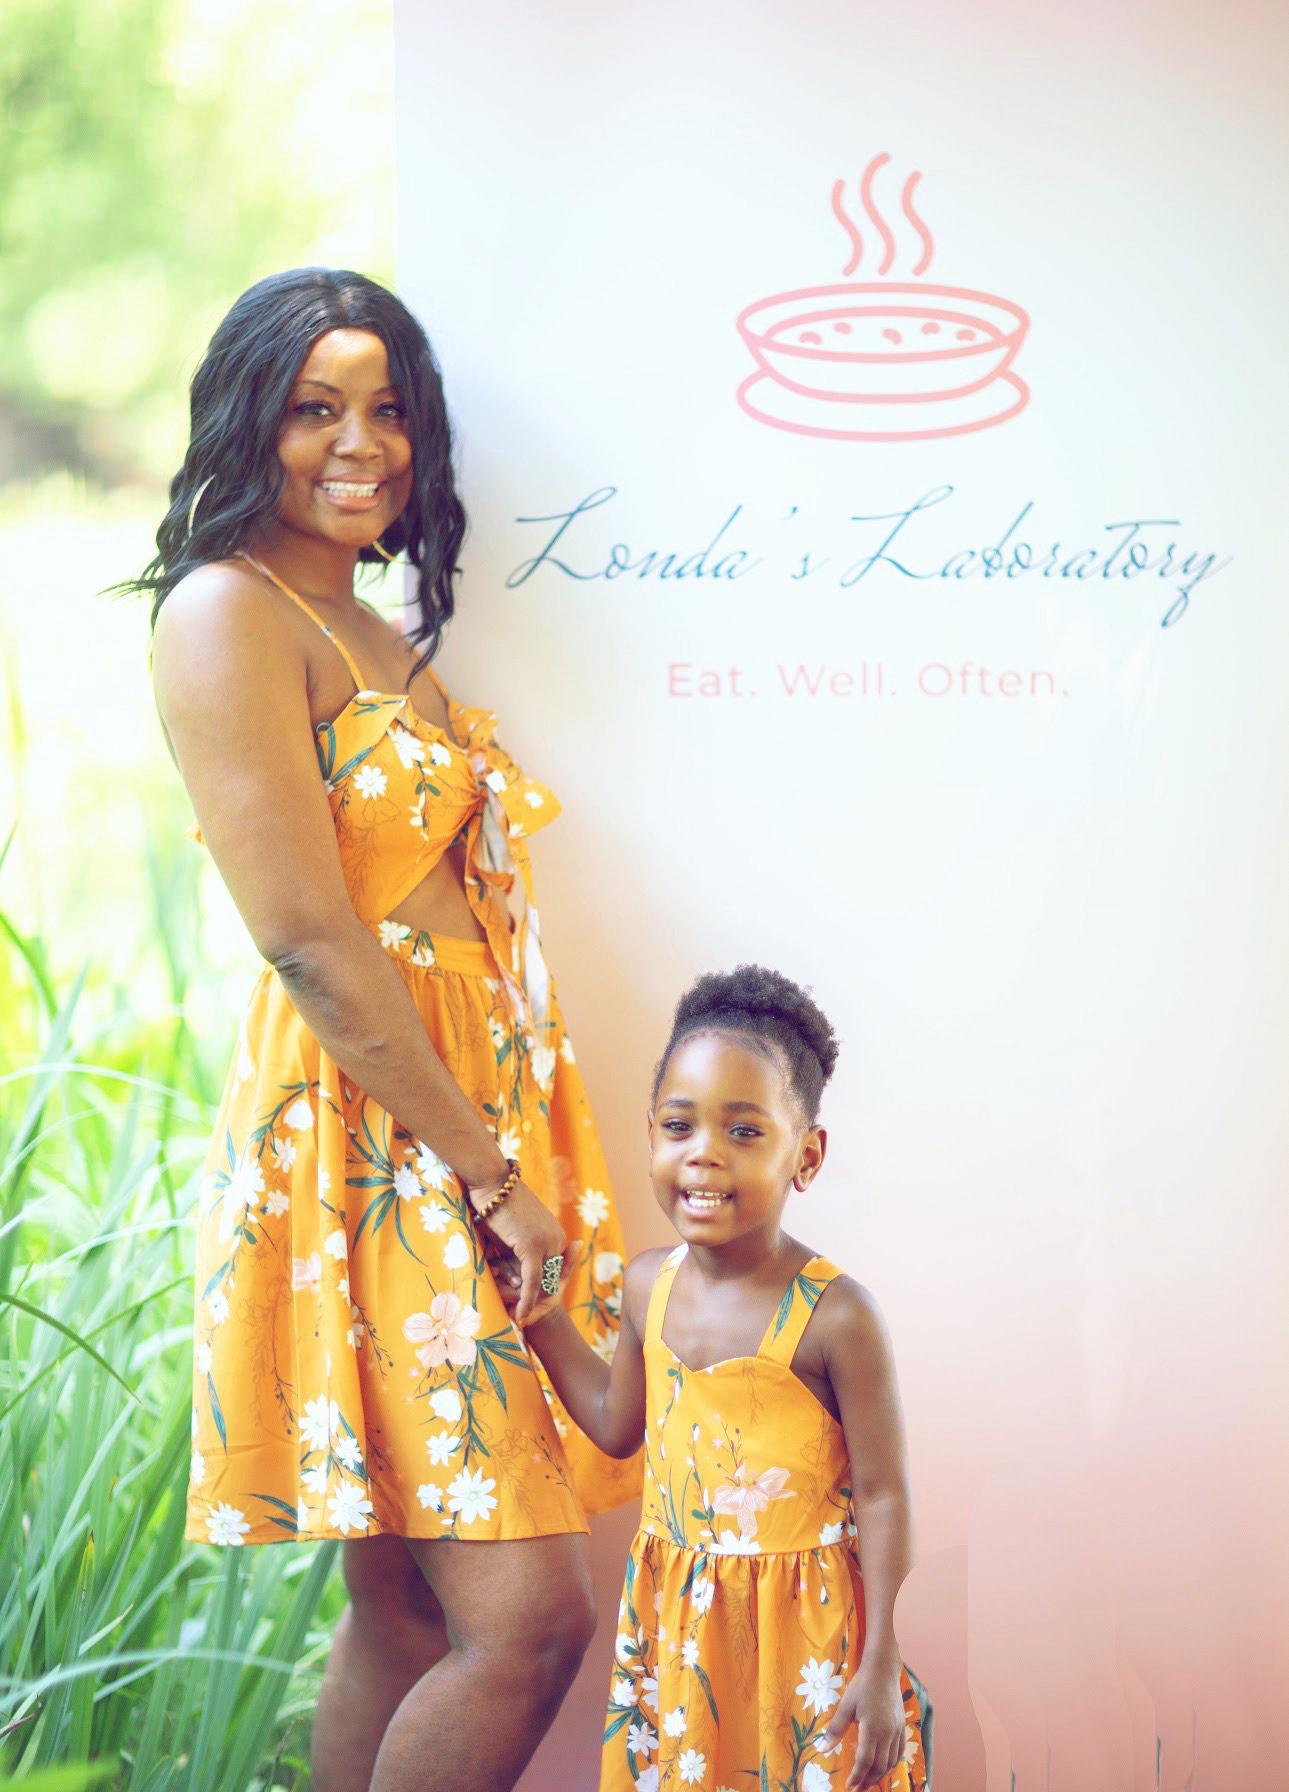 PHOTO: Yolanda Latimer, pictured with her daughter Savannah, started a food business while quarantining during the coronavirus pandemic.